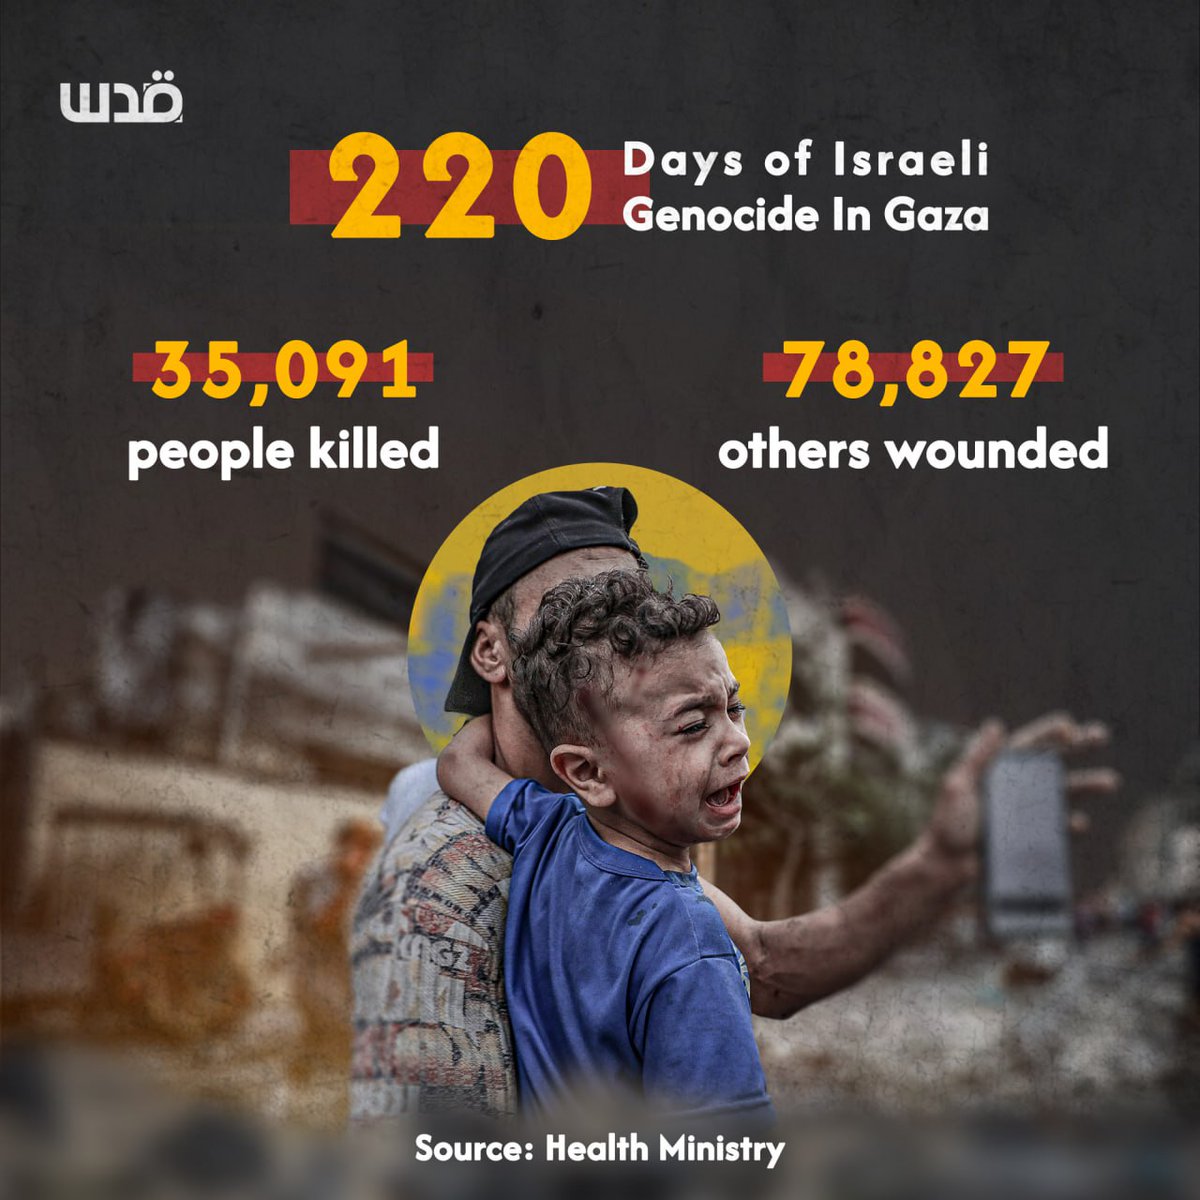 During the 220th day of the Israeli genocide in Gaza, the Strip continues to reel under Israeli relentless airstrikes and artillery bombardment. Civilians face unimaginable suffering as essential infrastructure, including hospitals and schools, lie in ruins.